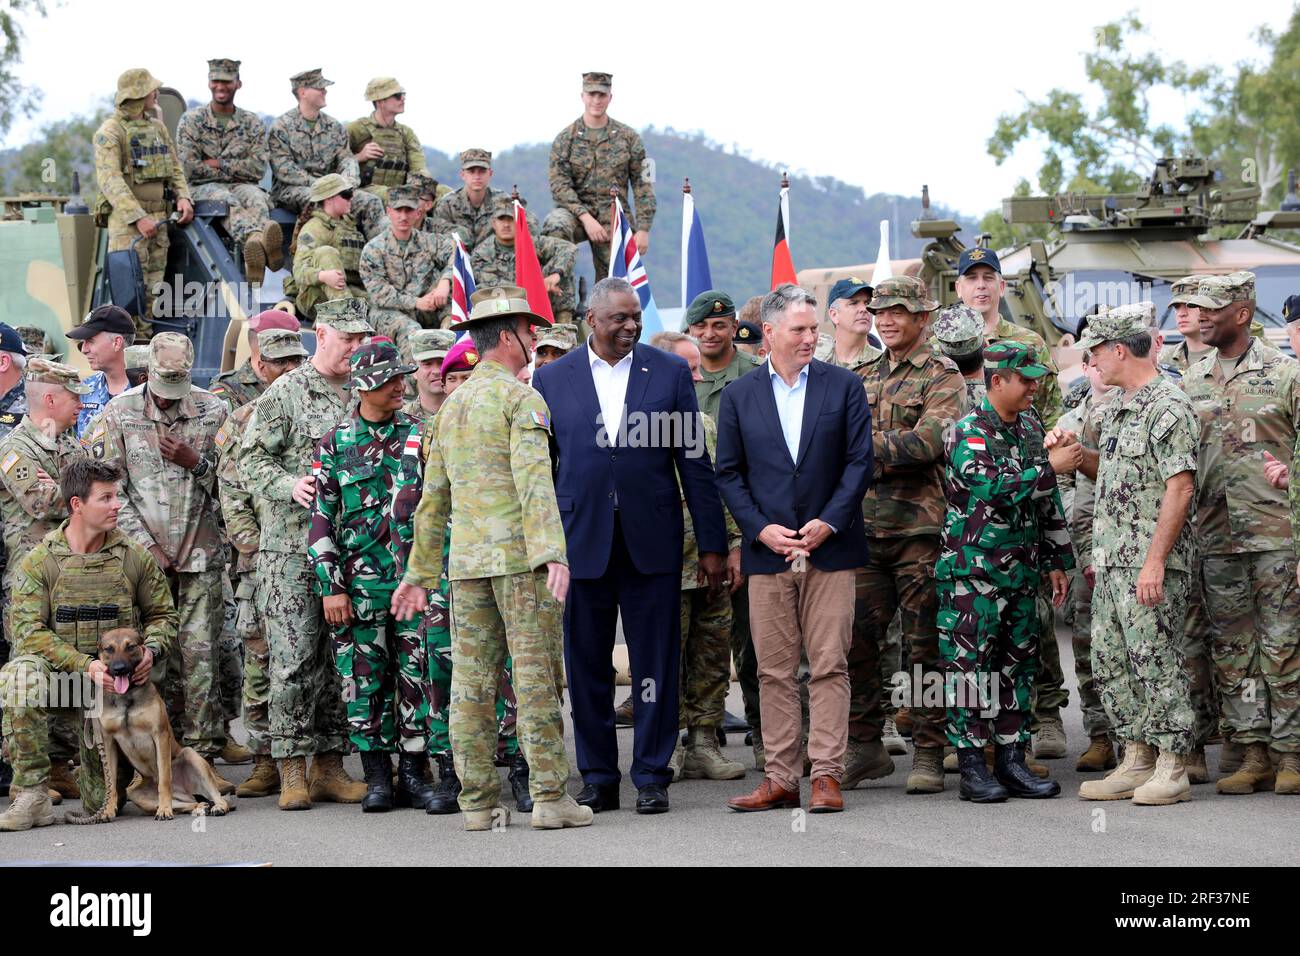 Townsville, Australia. 30th July, 2023. U.S Secretary of Defense Lloyd Austin, left center, and Australian Defense Minister Richard Marles, center right, join a group photo with multinational soldiers taking part in exercise Talisman Sabre at Lavarack Barracks, July 30, 2023 in Townsville, Queensland, Australia. Credit: Sgt 1C John Healy/U.S. Army Photo/Alamy Live News Stock Photo